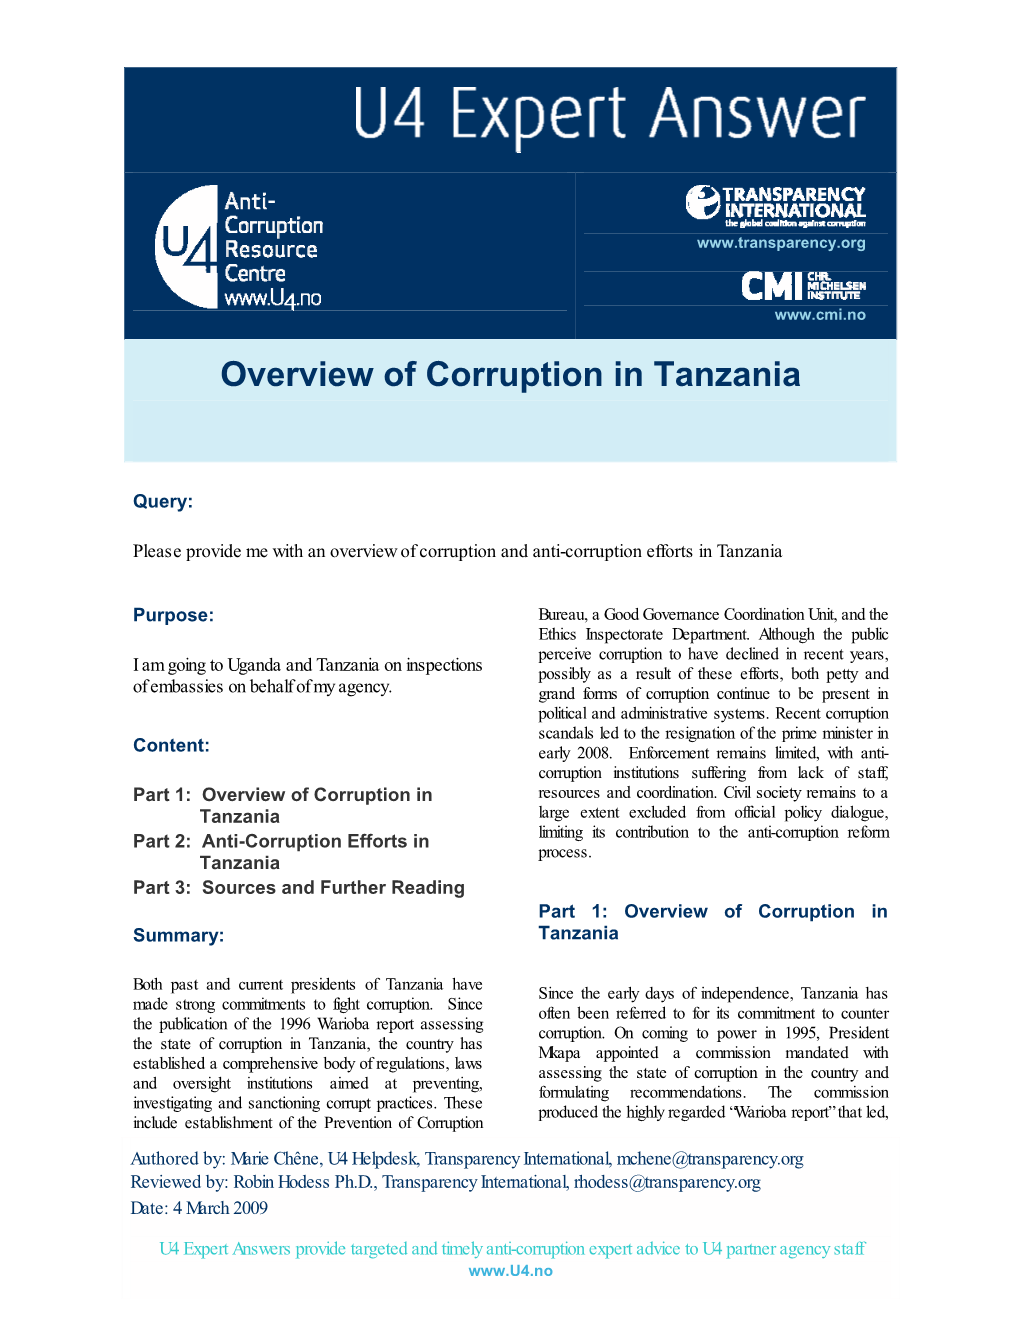 Overview of Corruption in Tanzania